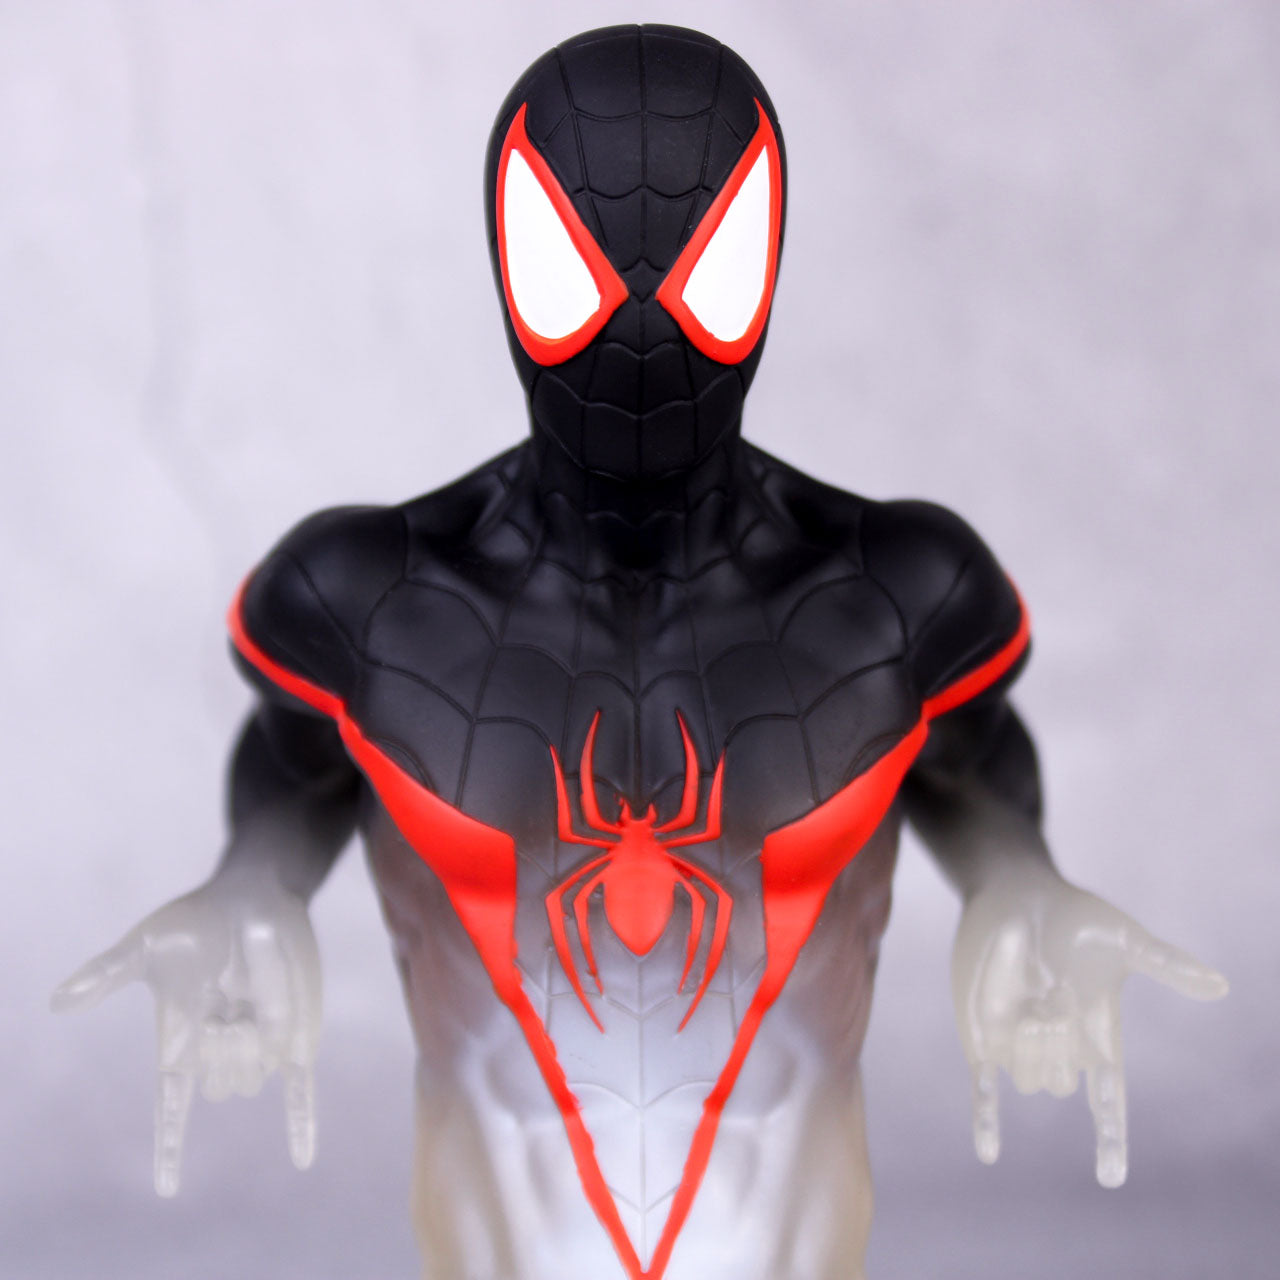 Camouflage Miles Morales (Marvel's Spider-Man) 1/6 Scale Resin Statue Bust